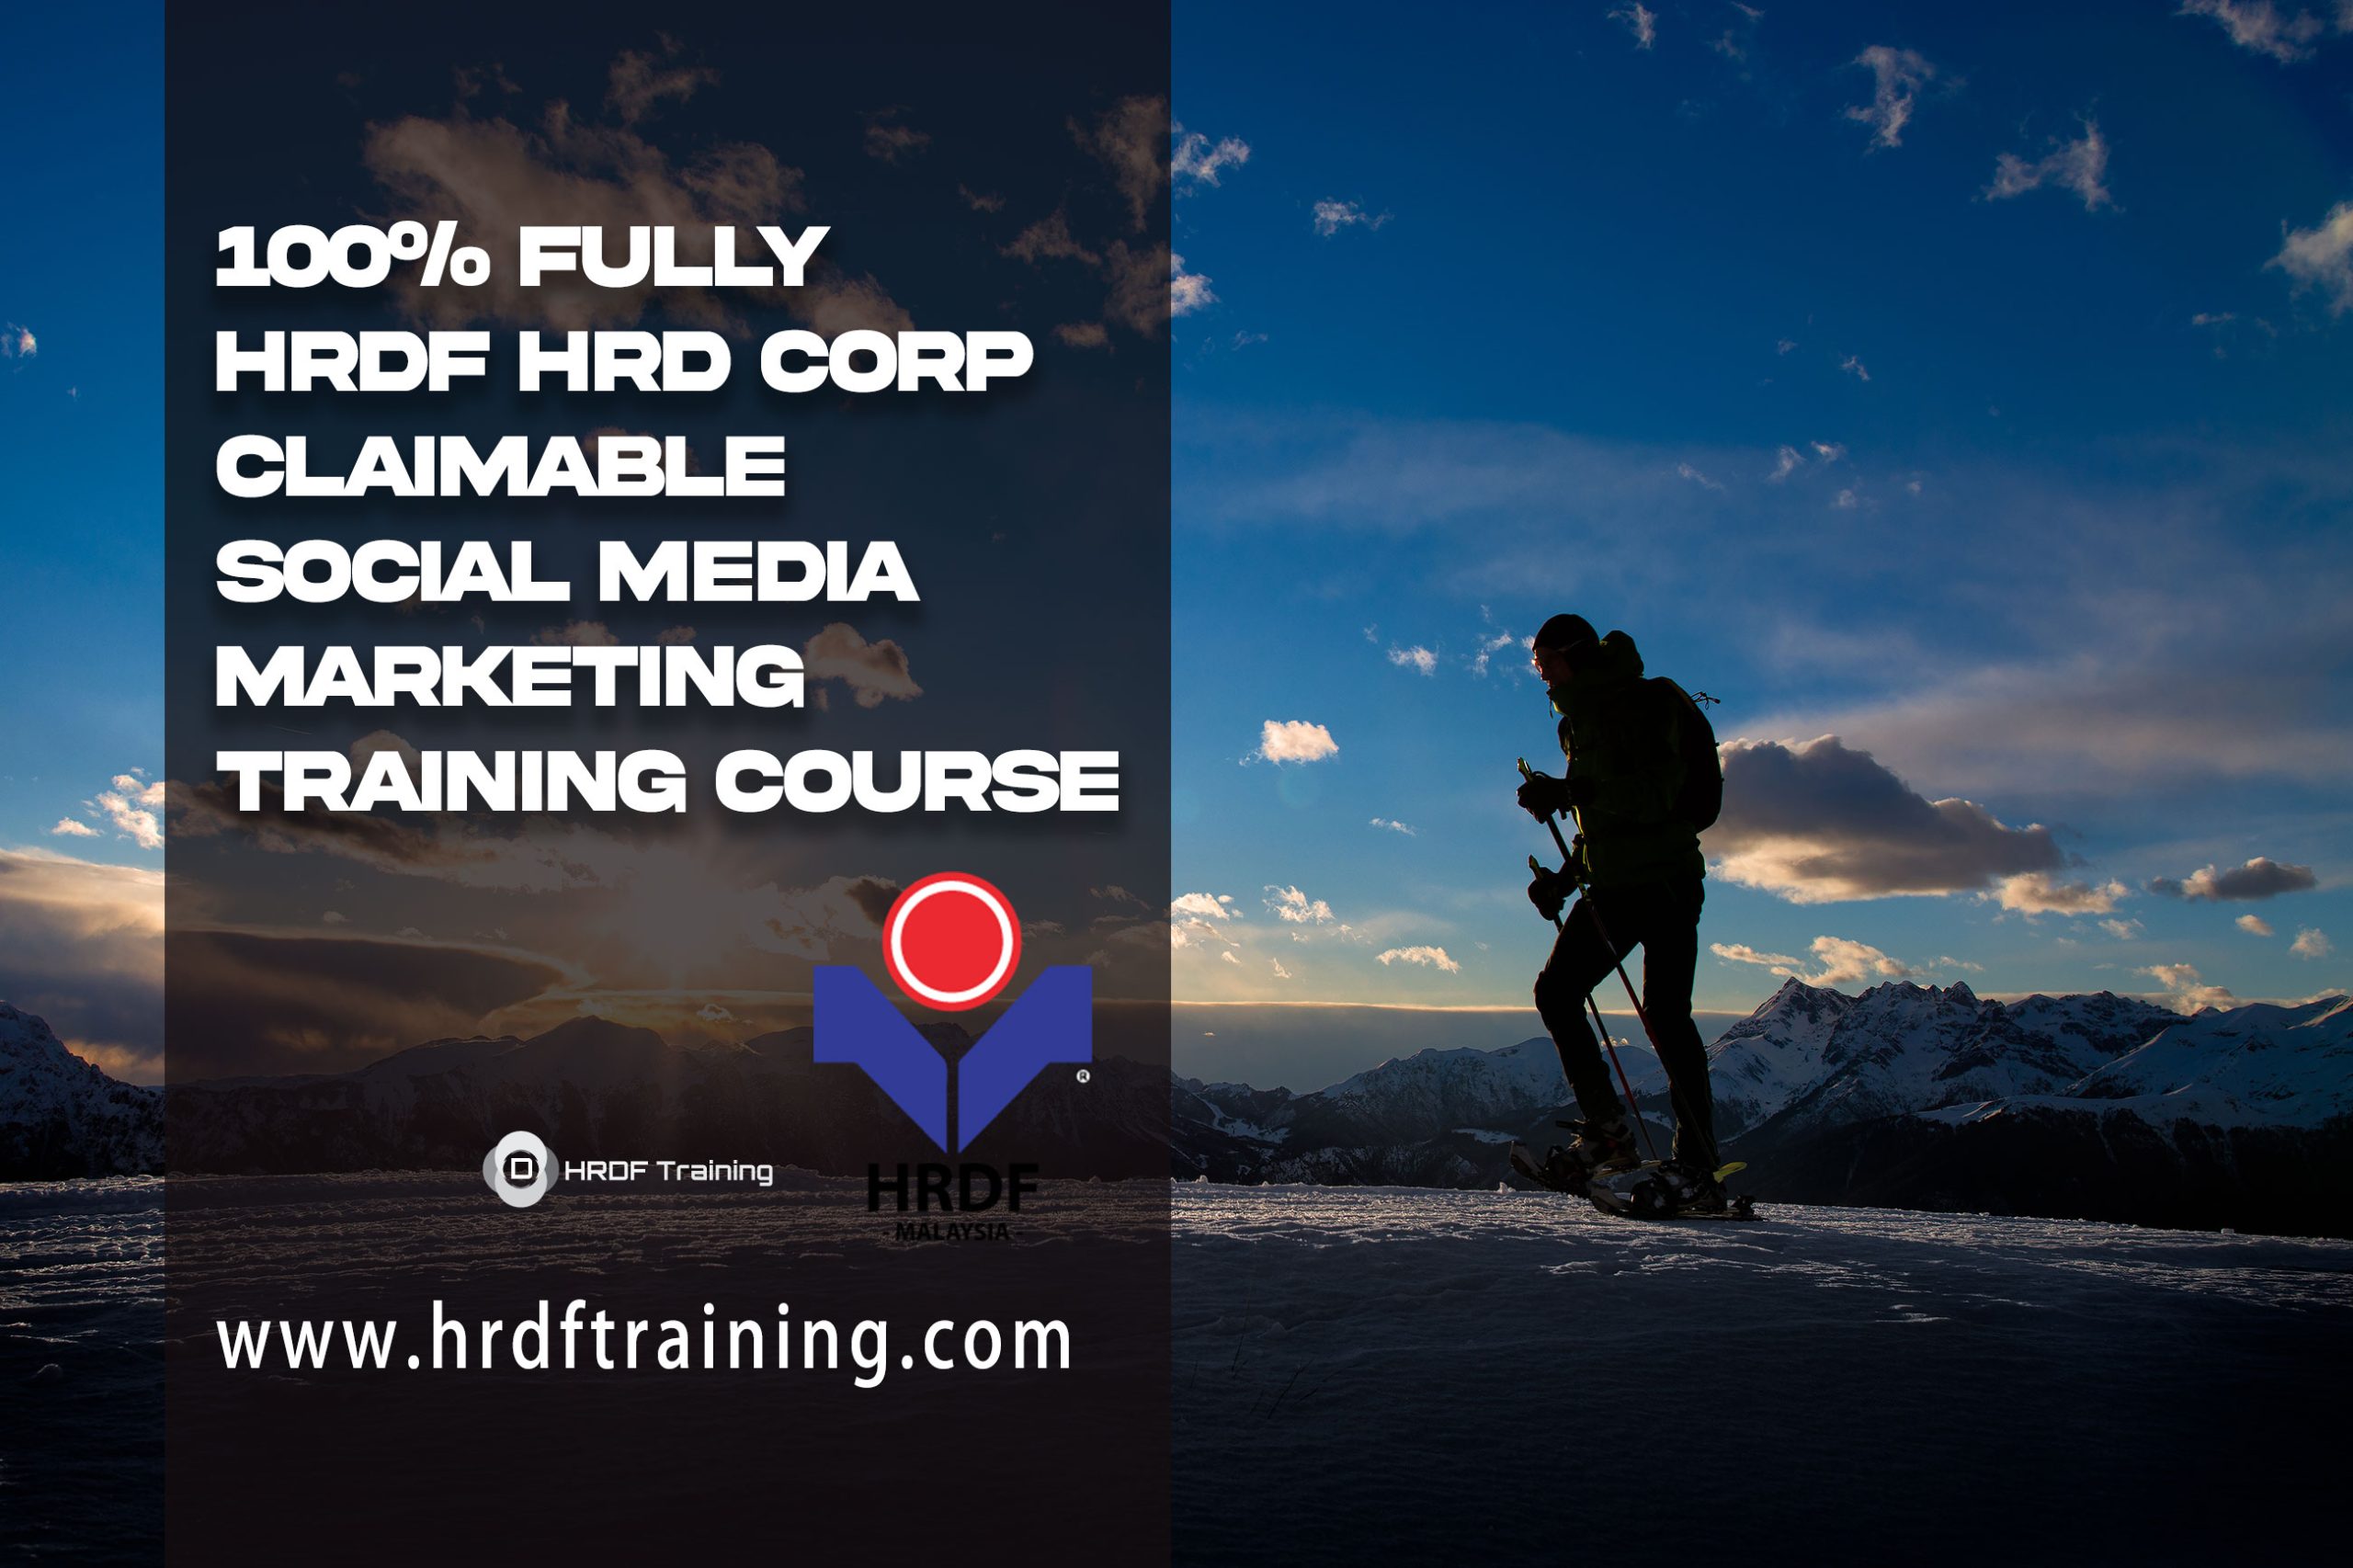 HRDF HRD Corp Claimable Social Media Marketing Training Course - August 2022